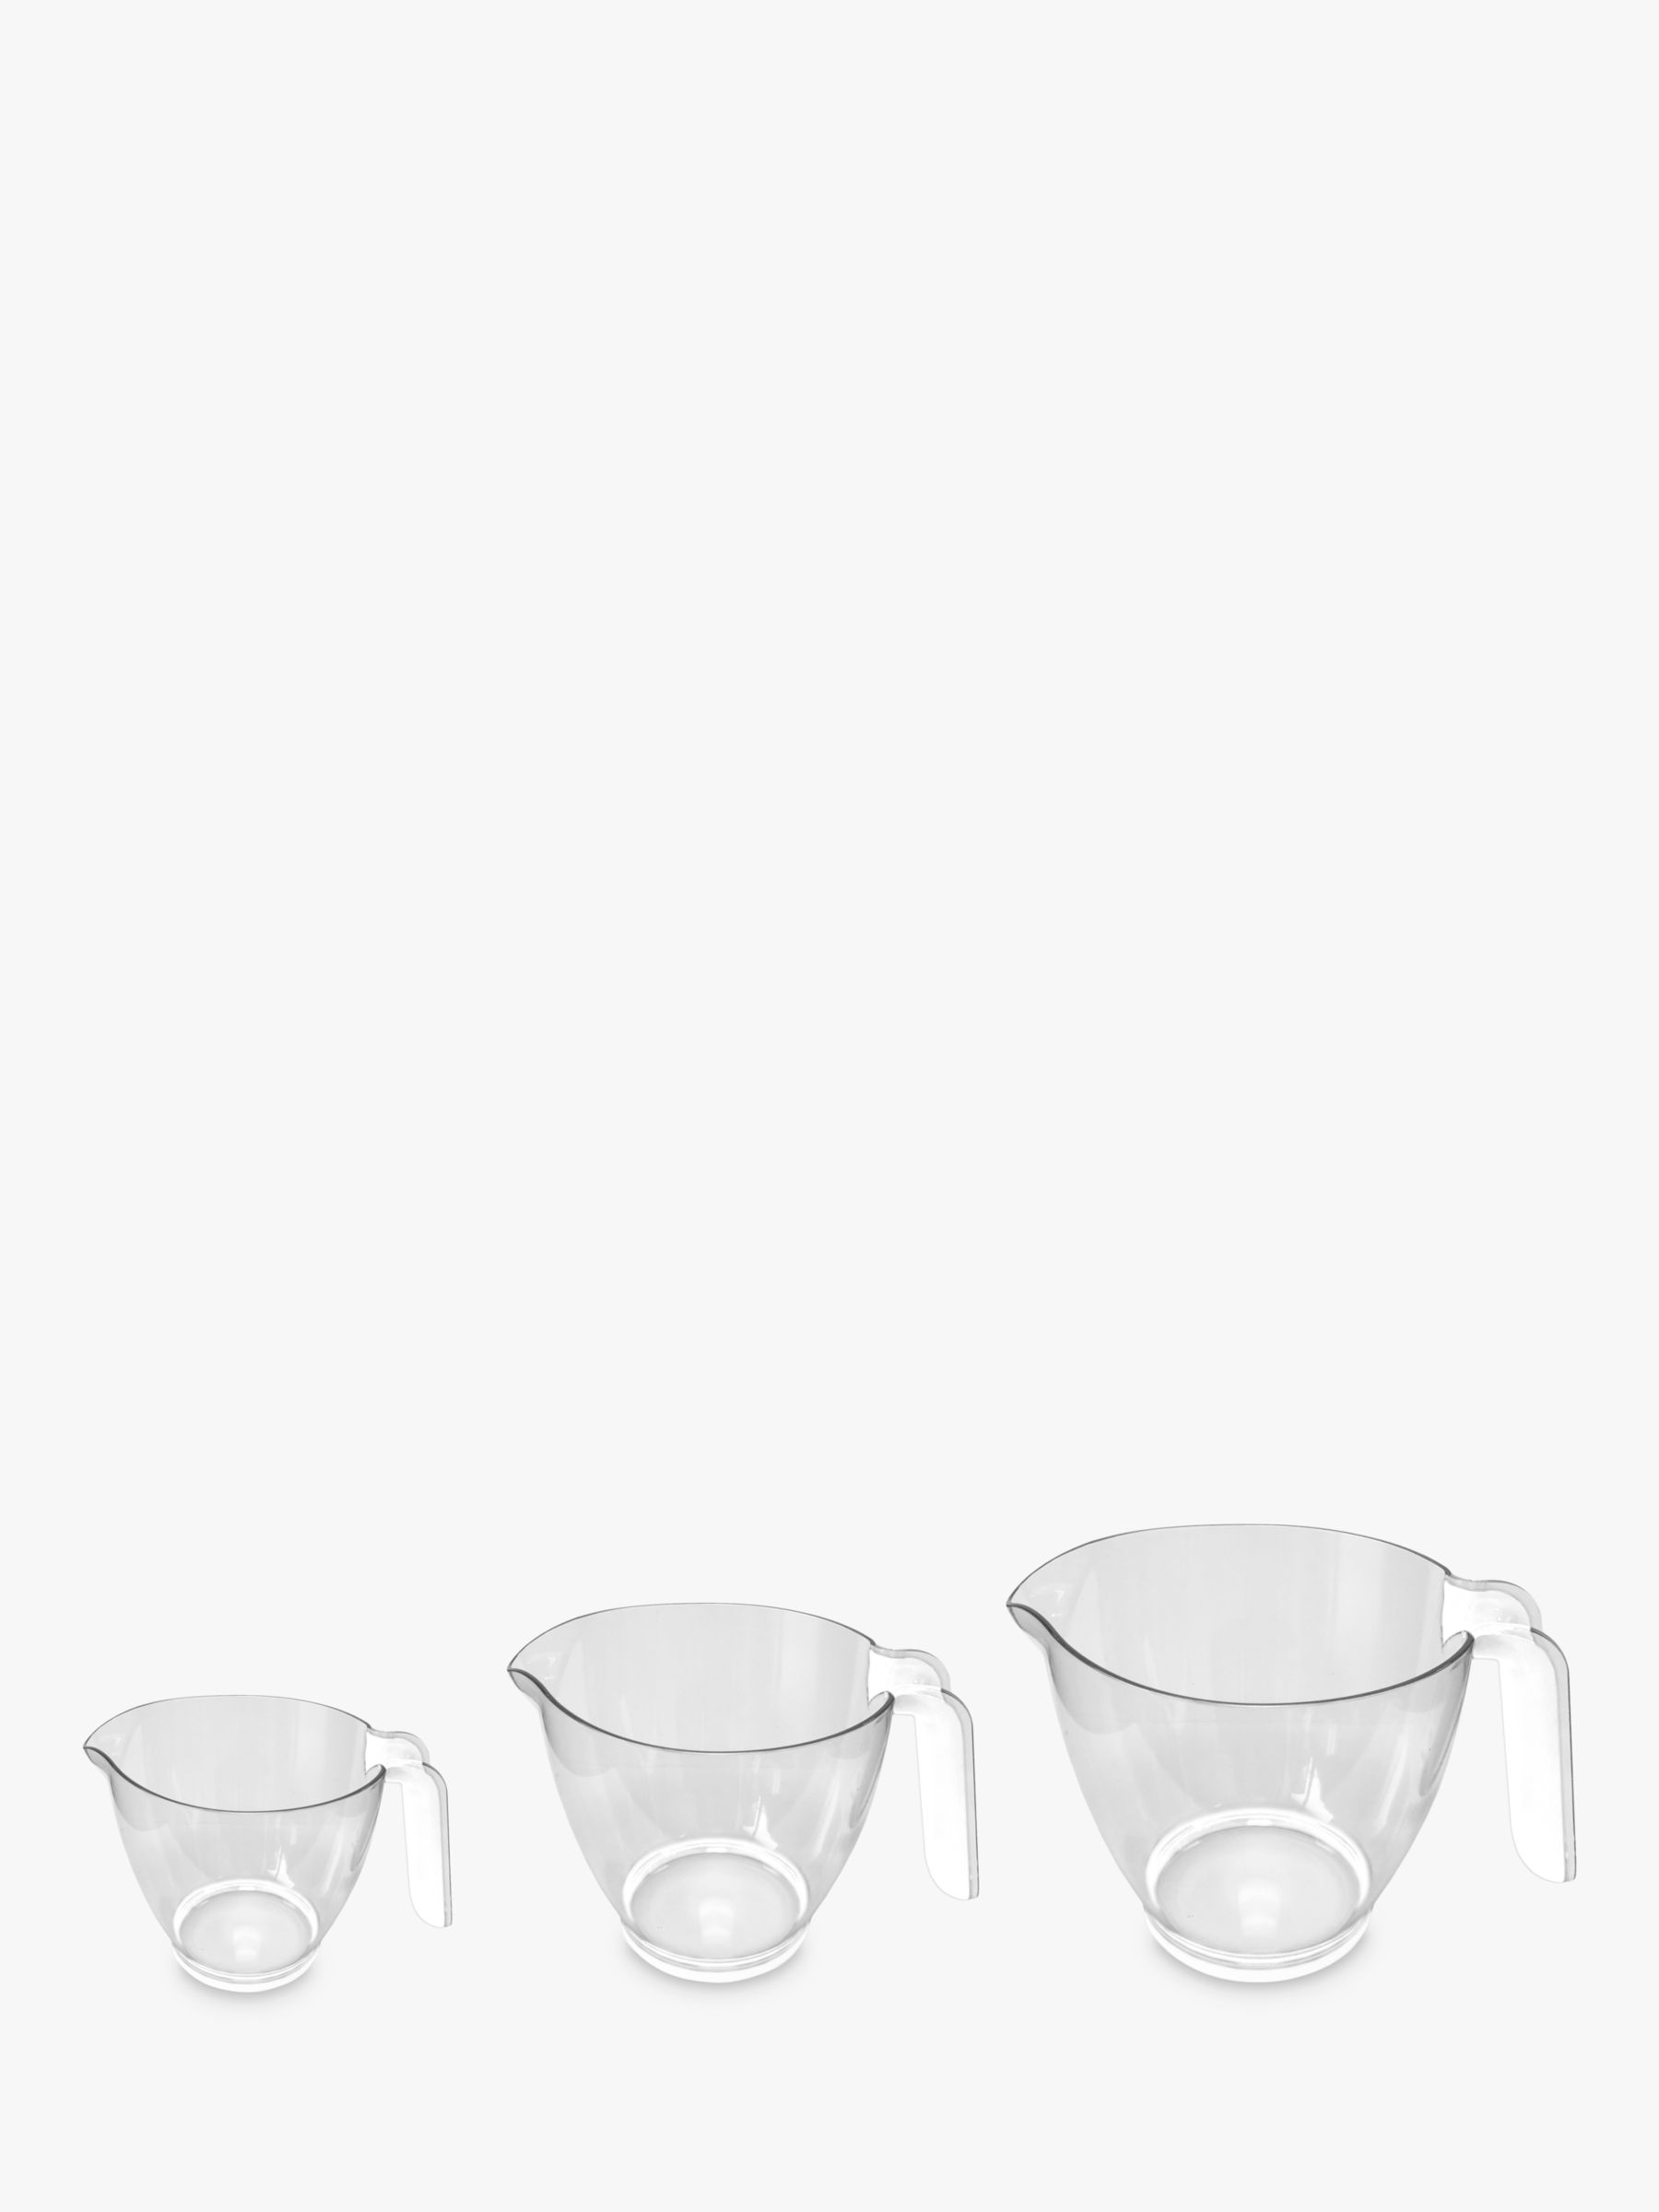 John Lewis & Partners Measuring and Mixing Jugs, Set of 3, Clear